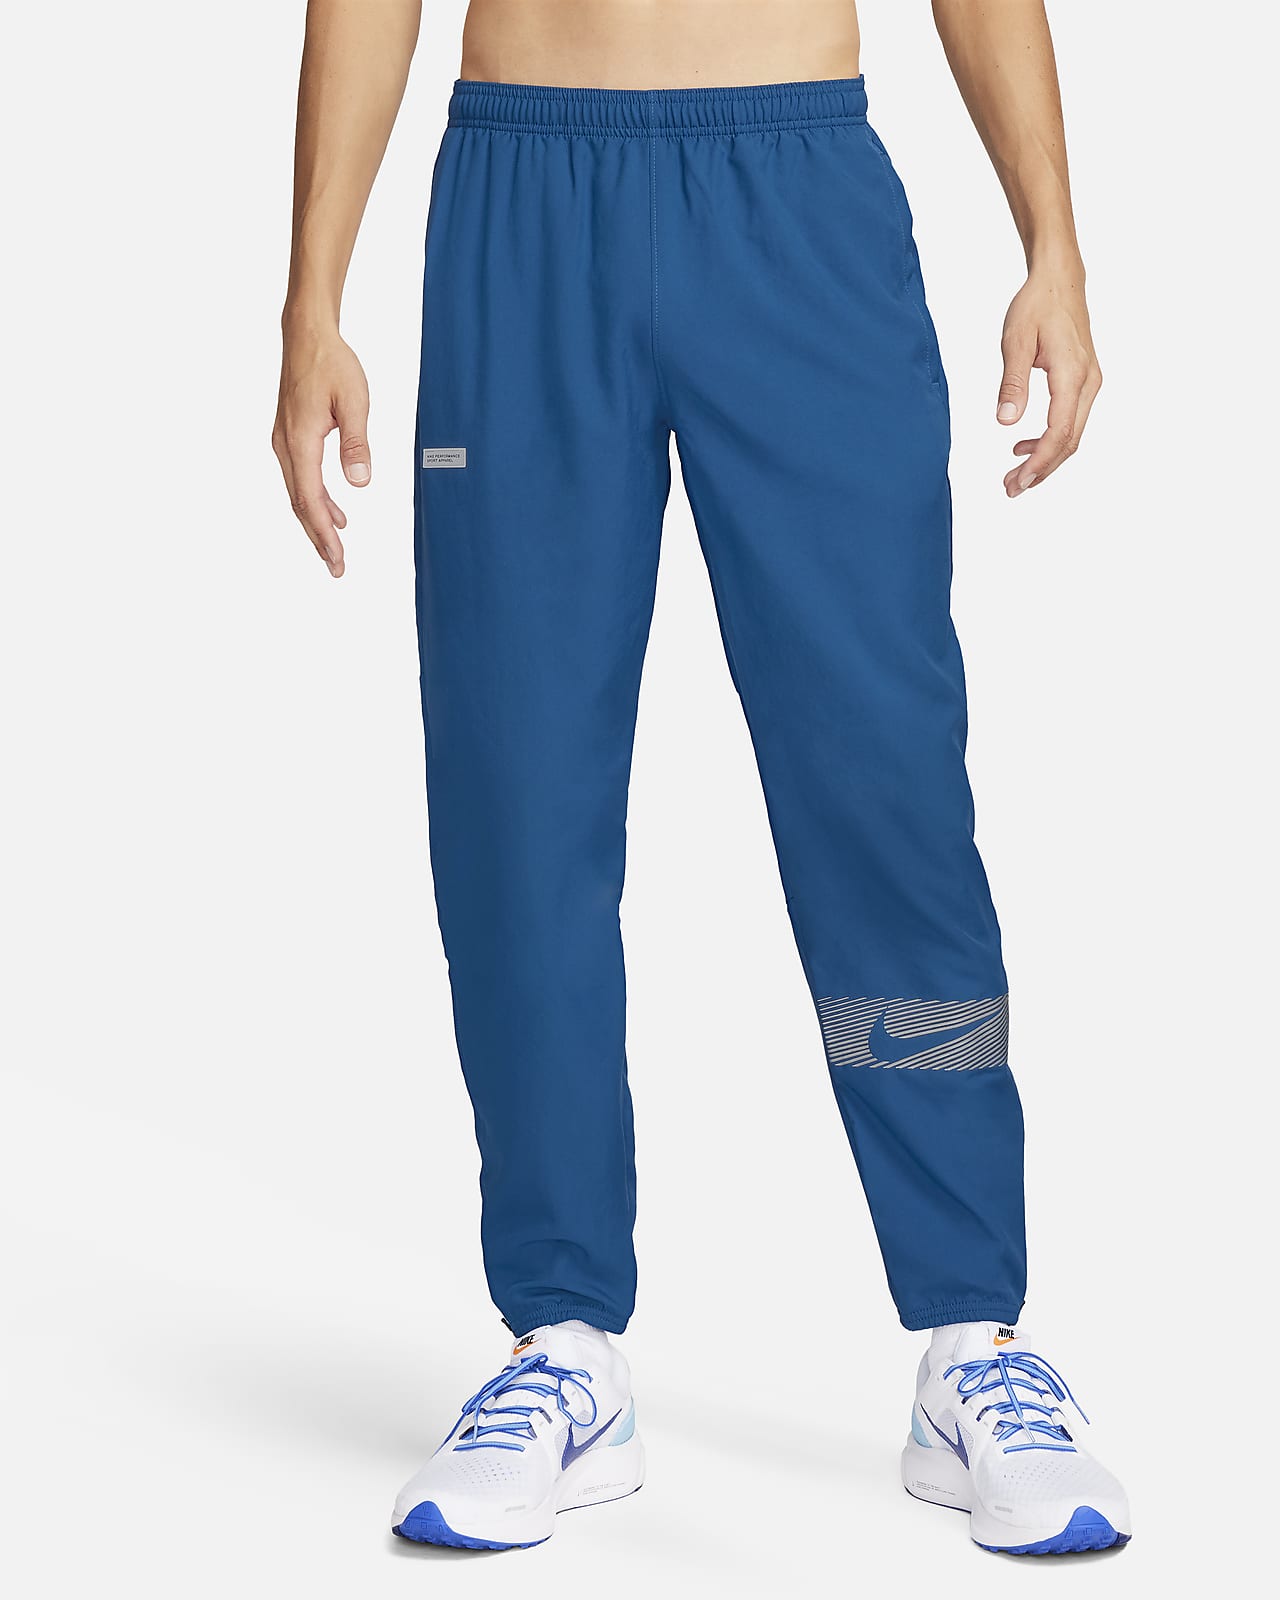 Mens Challenger Tracksuit - Navy